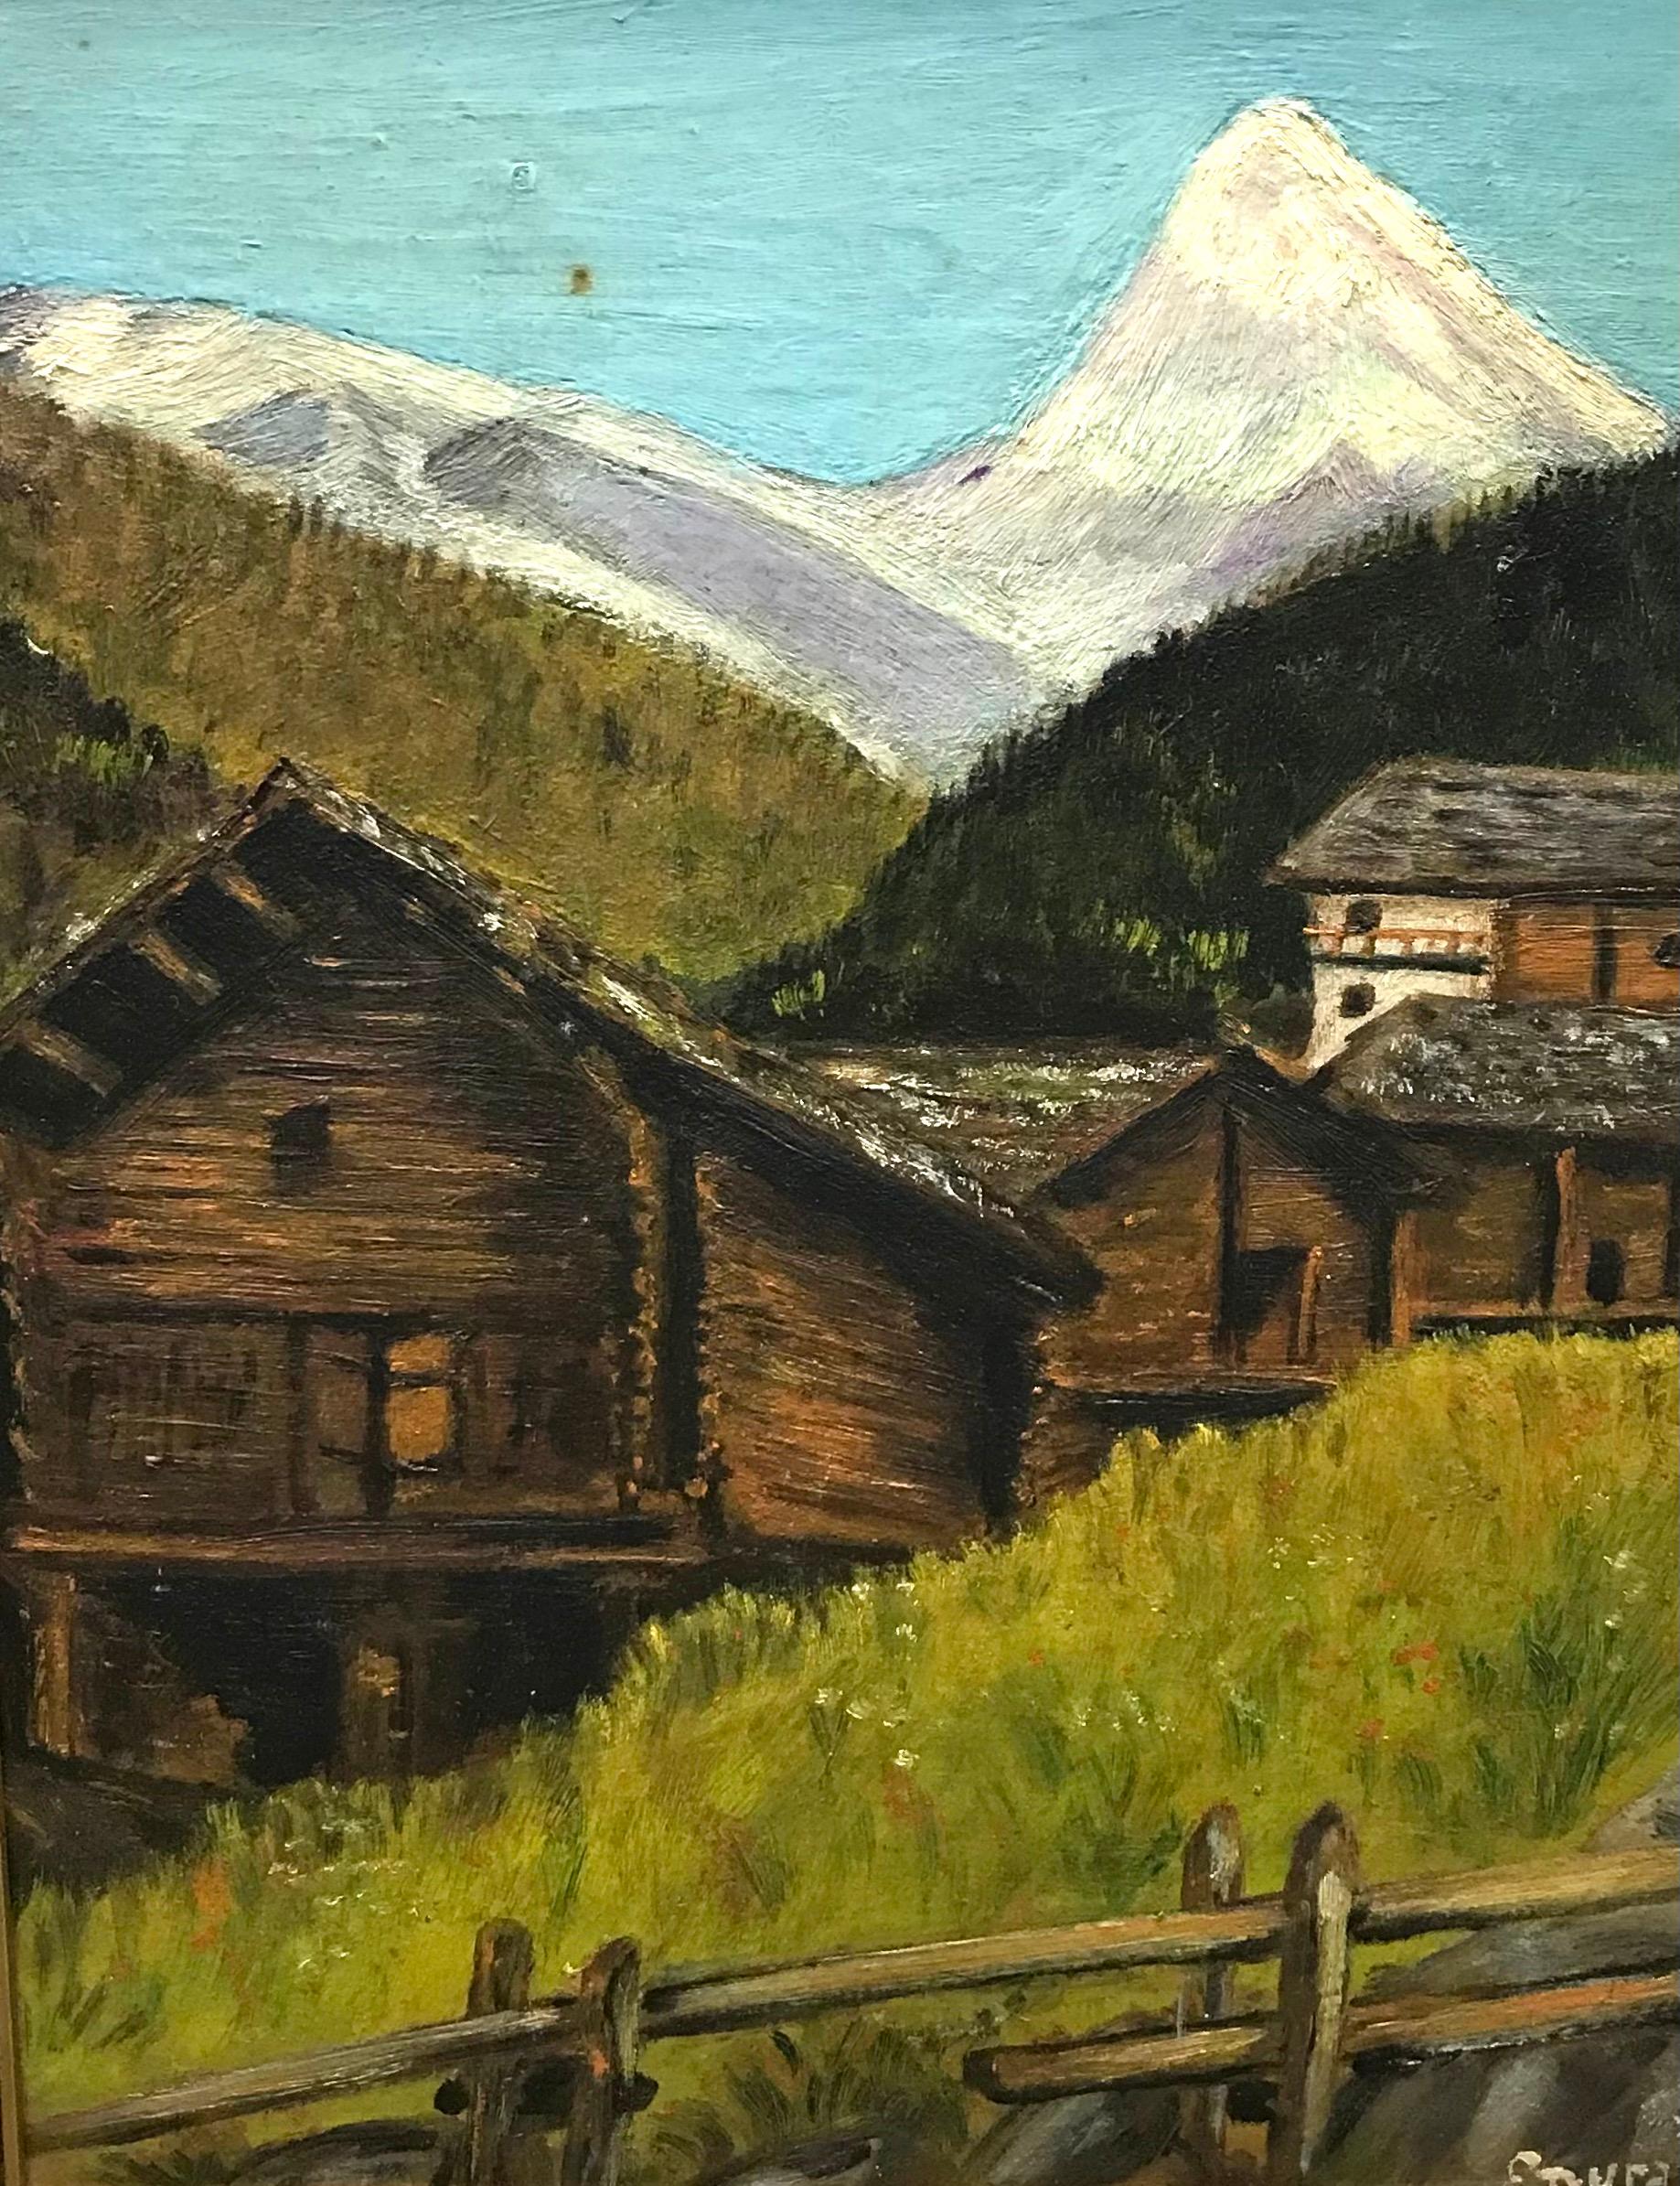 Mountain chalets - Land Painting by Eugène Duran